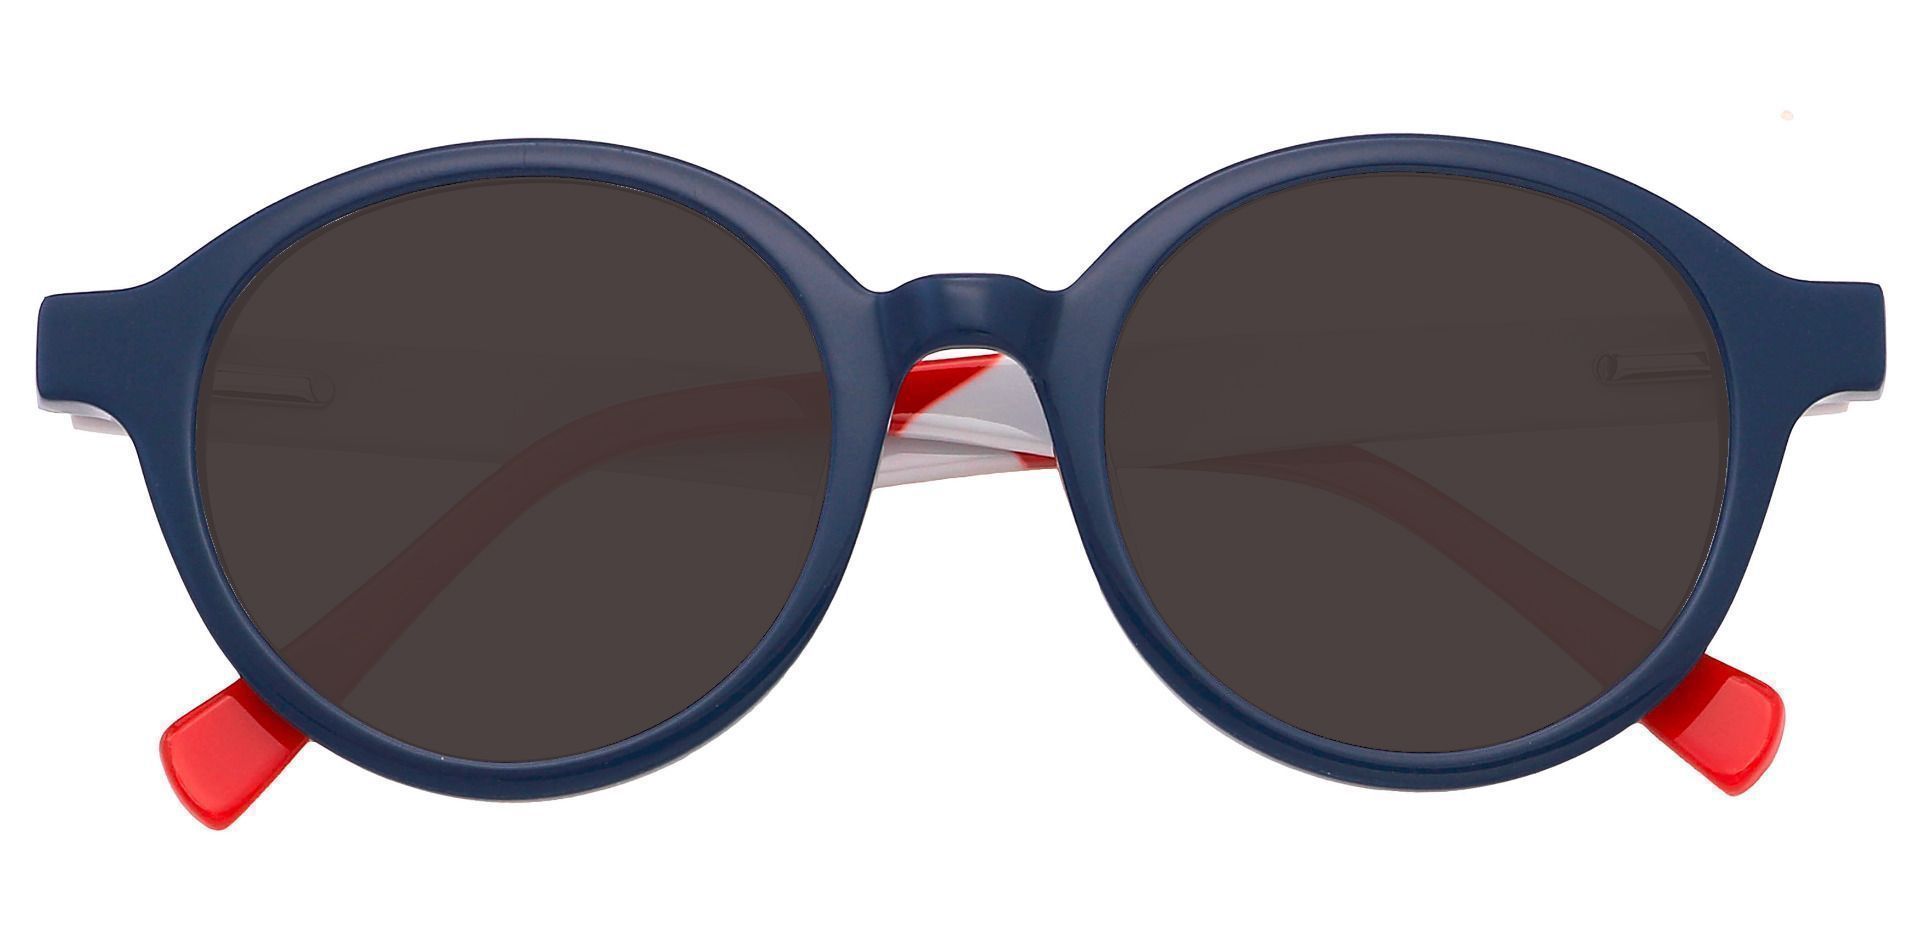 Dudley Round Single Vision Sunglasses - Blue Frame With Gray Lenses